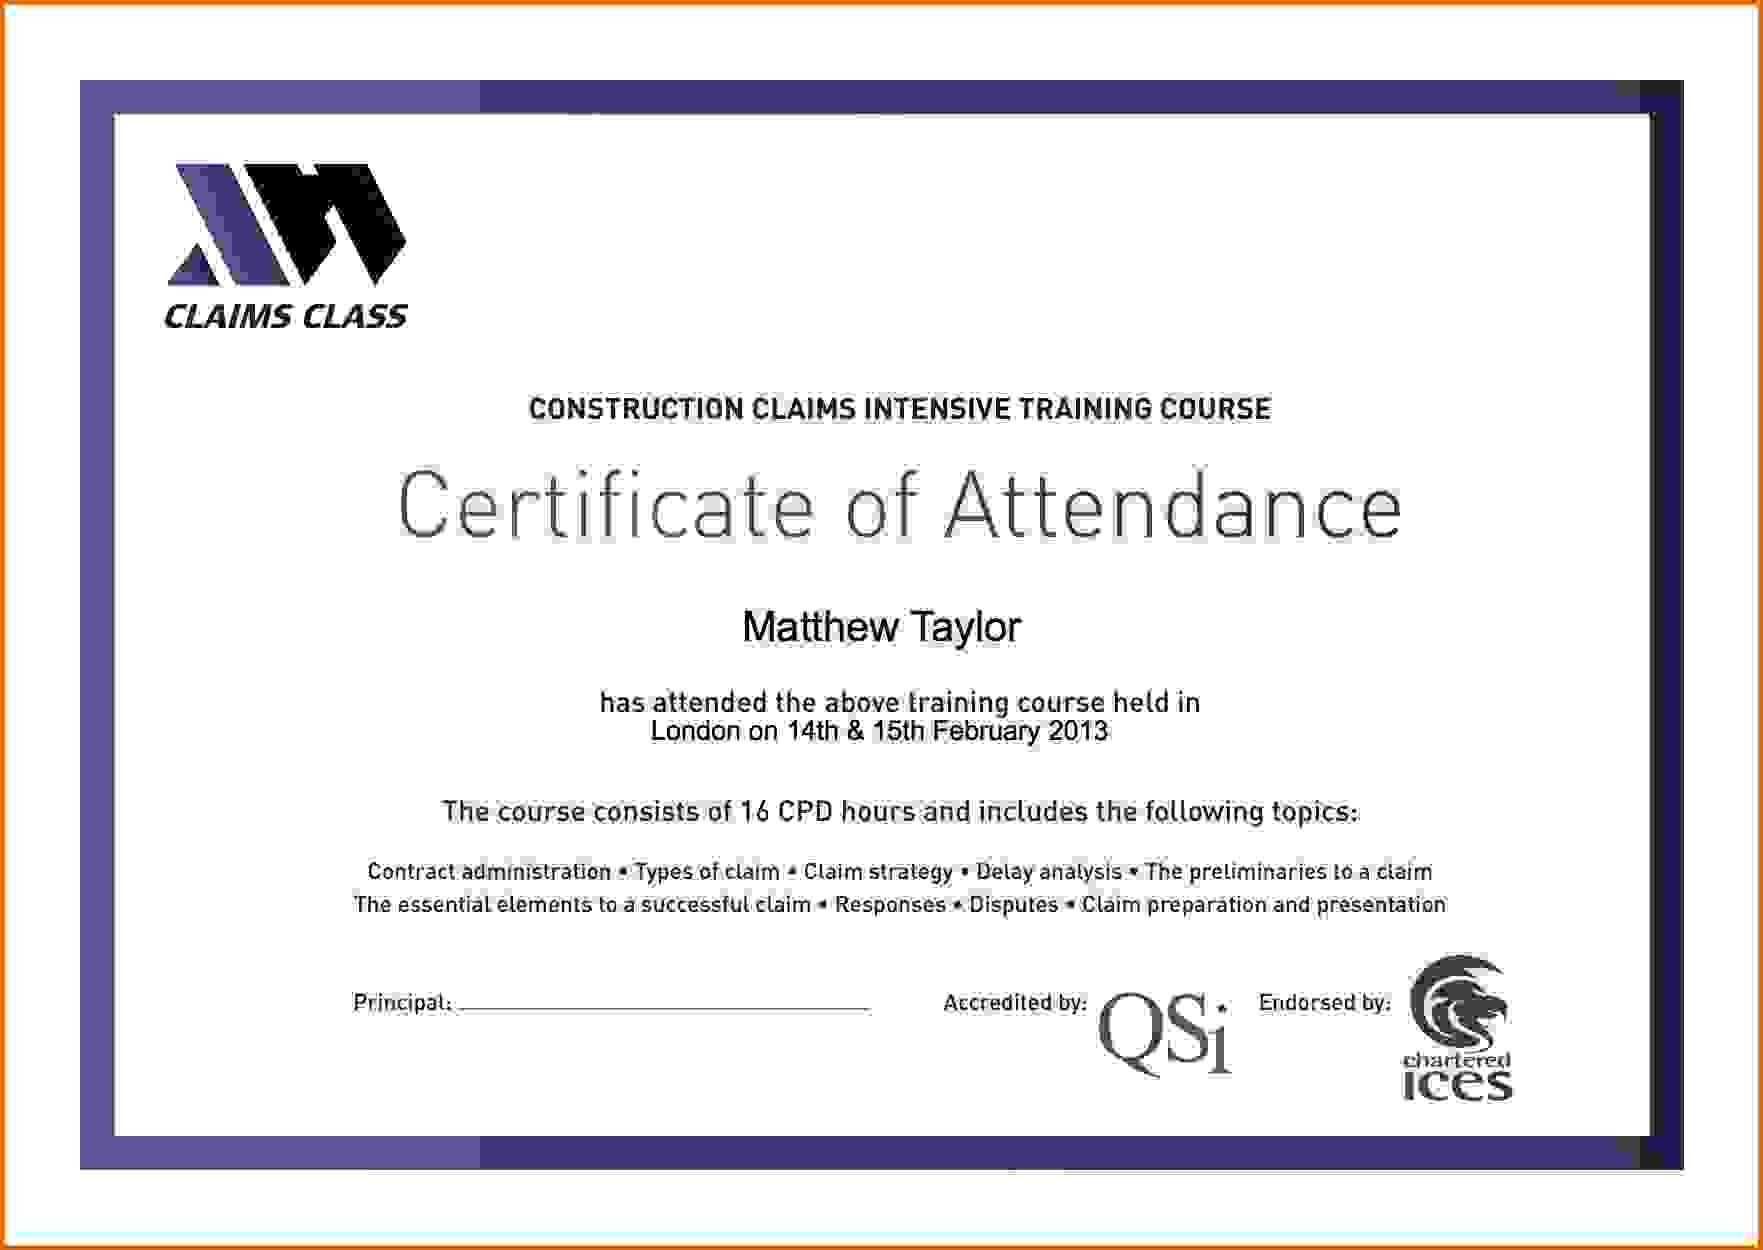 Certificate Attendance Templatec Certification Letter Within This Entitles The Bearer To Template Certificate